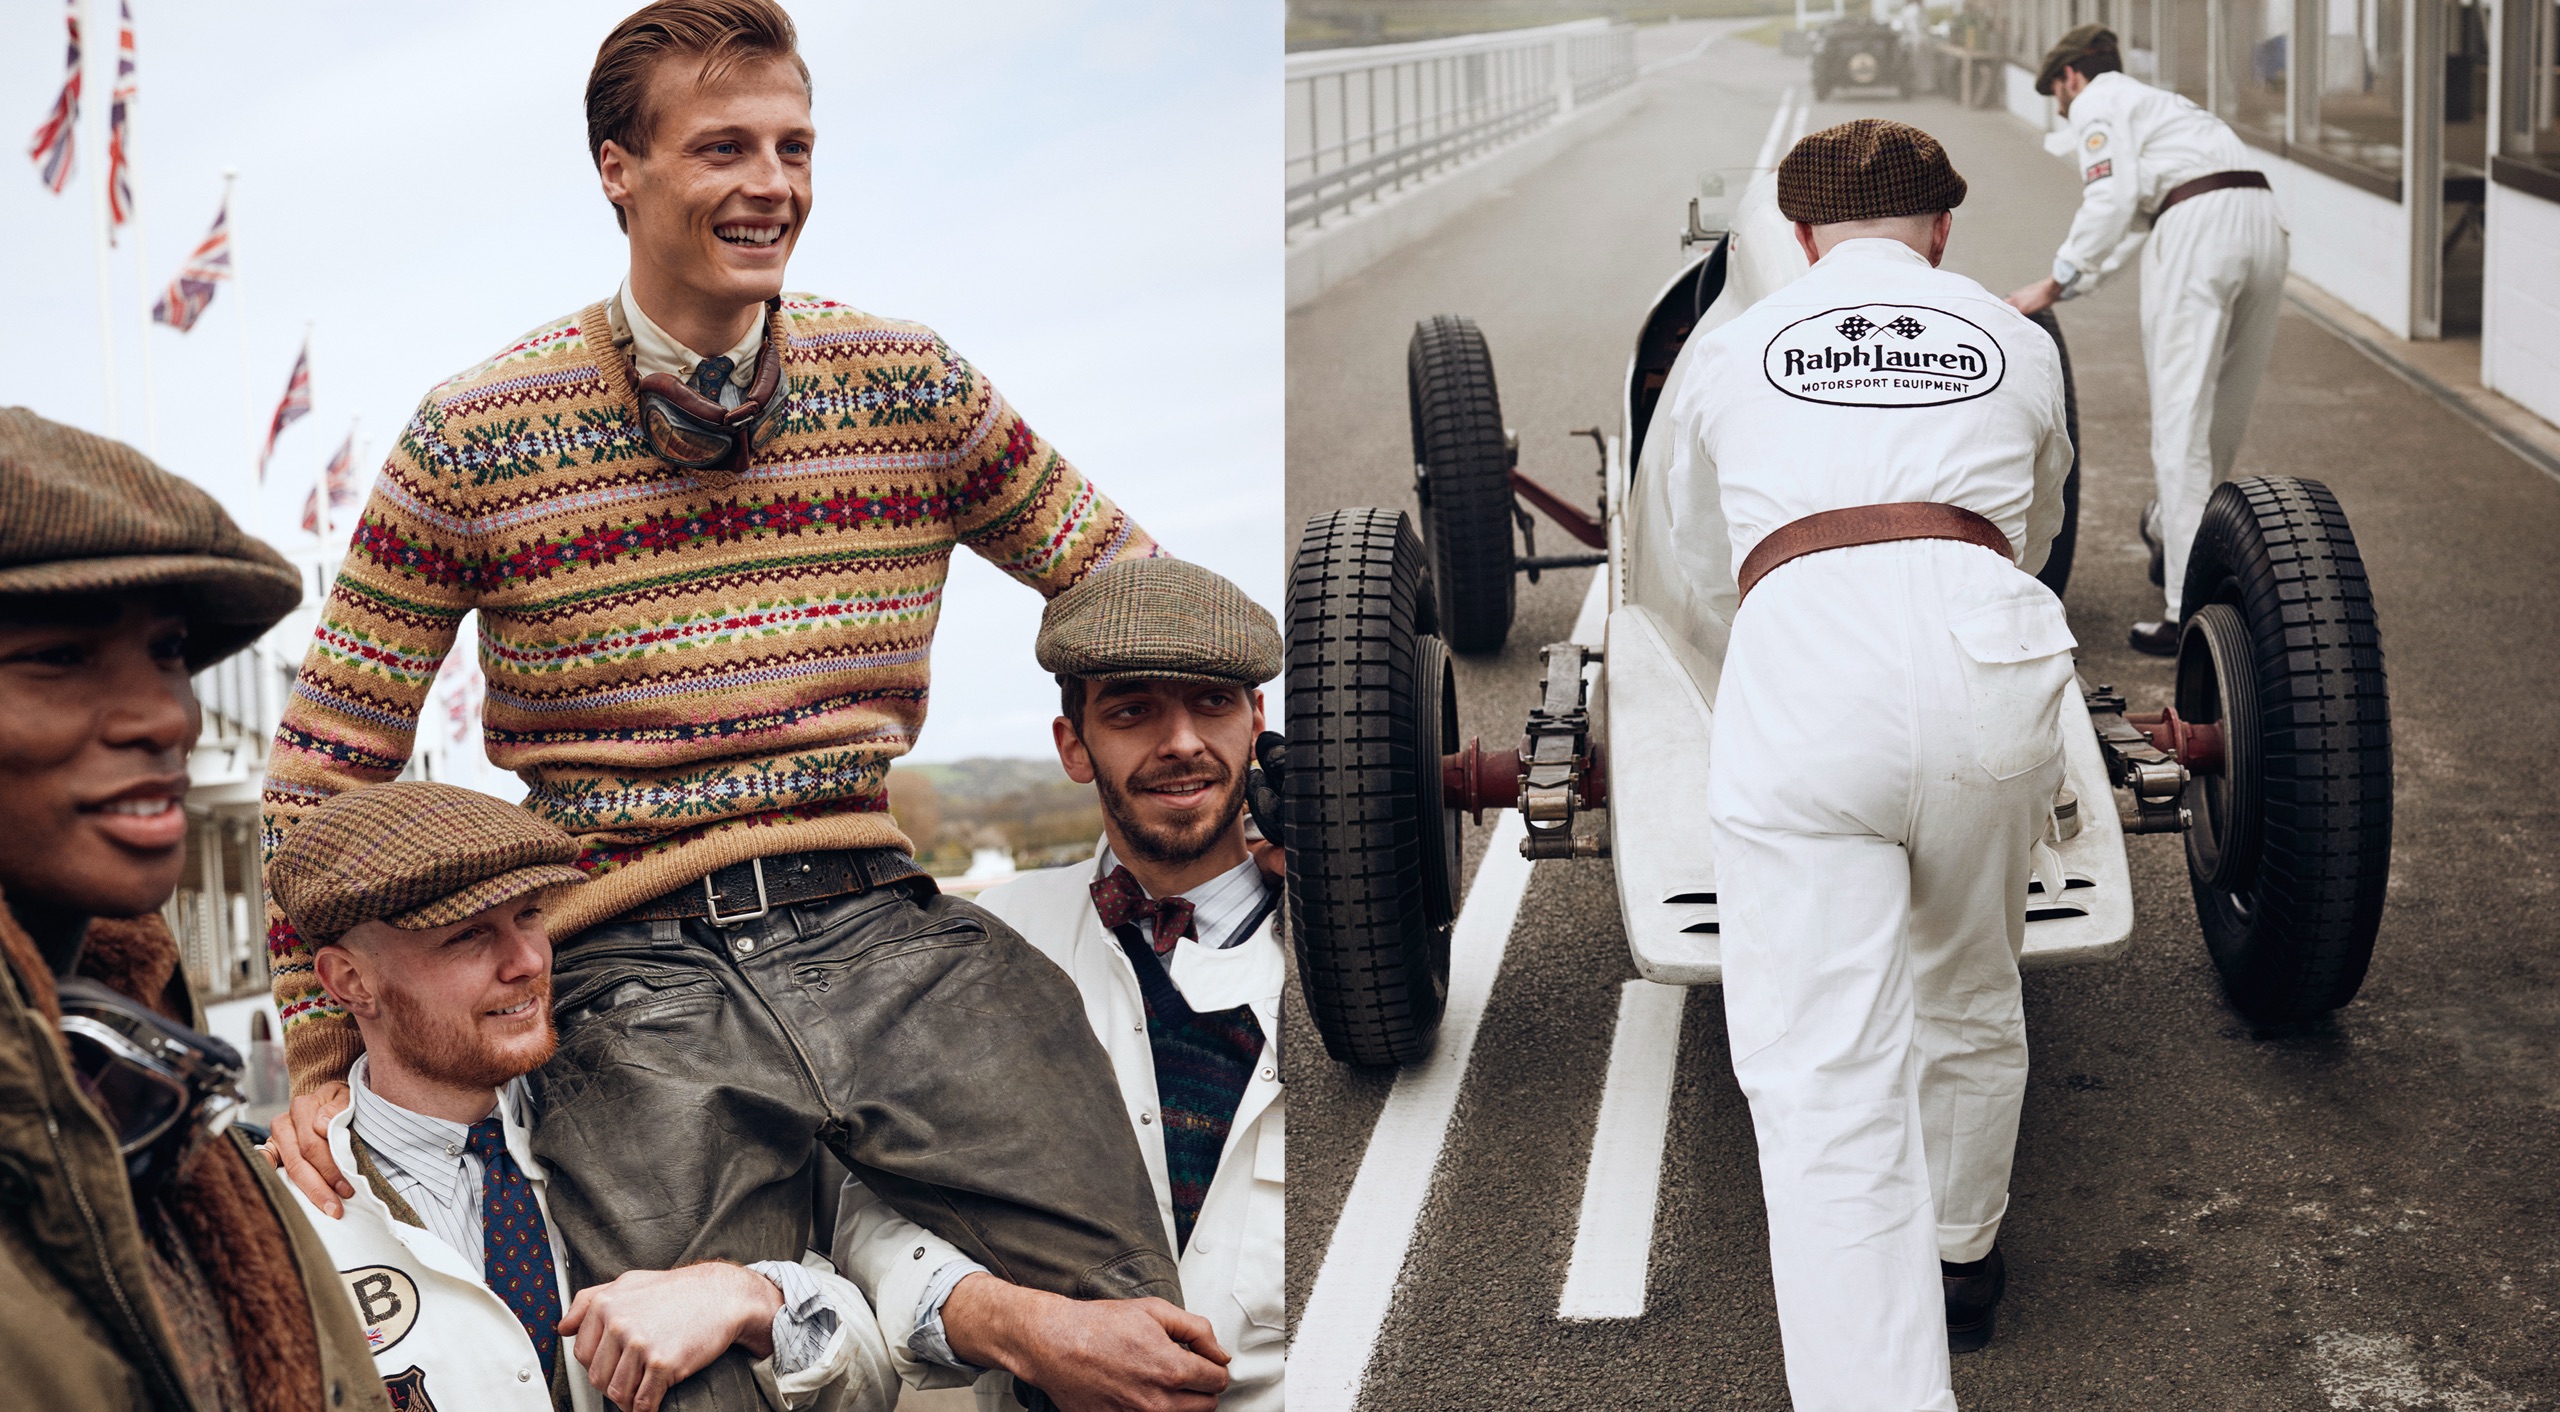 <strong>ON LOCATION</strong><br/><span>This season of Polo Originals, inspired by the golden era of Grand Prix car racing, was photographed at the Goodwood Motor Circuit, which is located in West Sussex, on the 12,000-acre Goodwood Estate. The Circuit has since become known for hosting a number of prestigious motorsport events, including the famous Festival of Speed and Revival.</span> <br/><rlmag_link href="https://www.ralphlauren.global/am/en/search?cgid=brands-prl-tough-and-refined-cg"><button class="shop-collection">Shop the Story</button></rlmag_link>